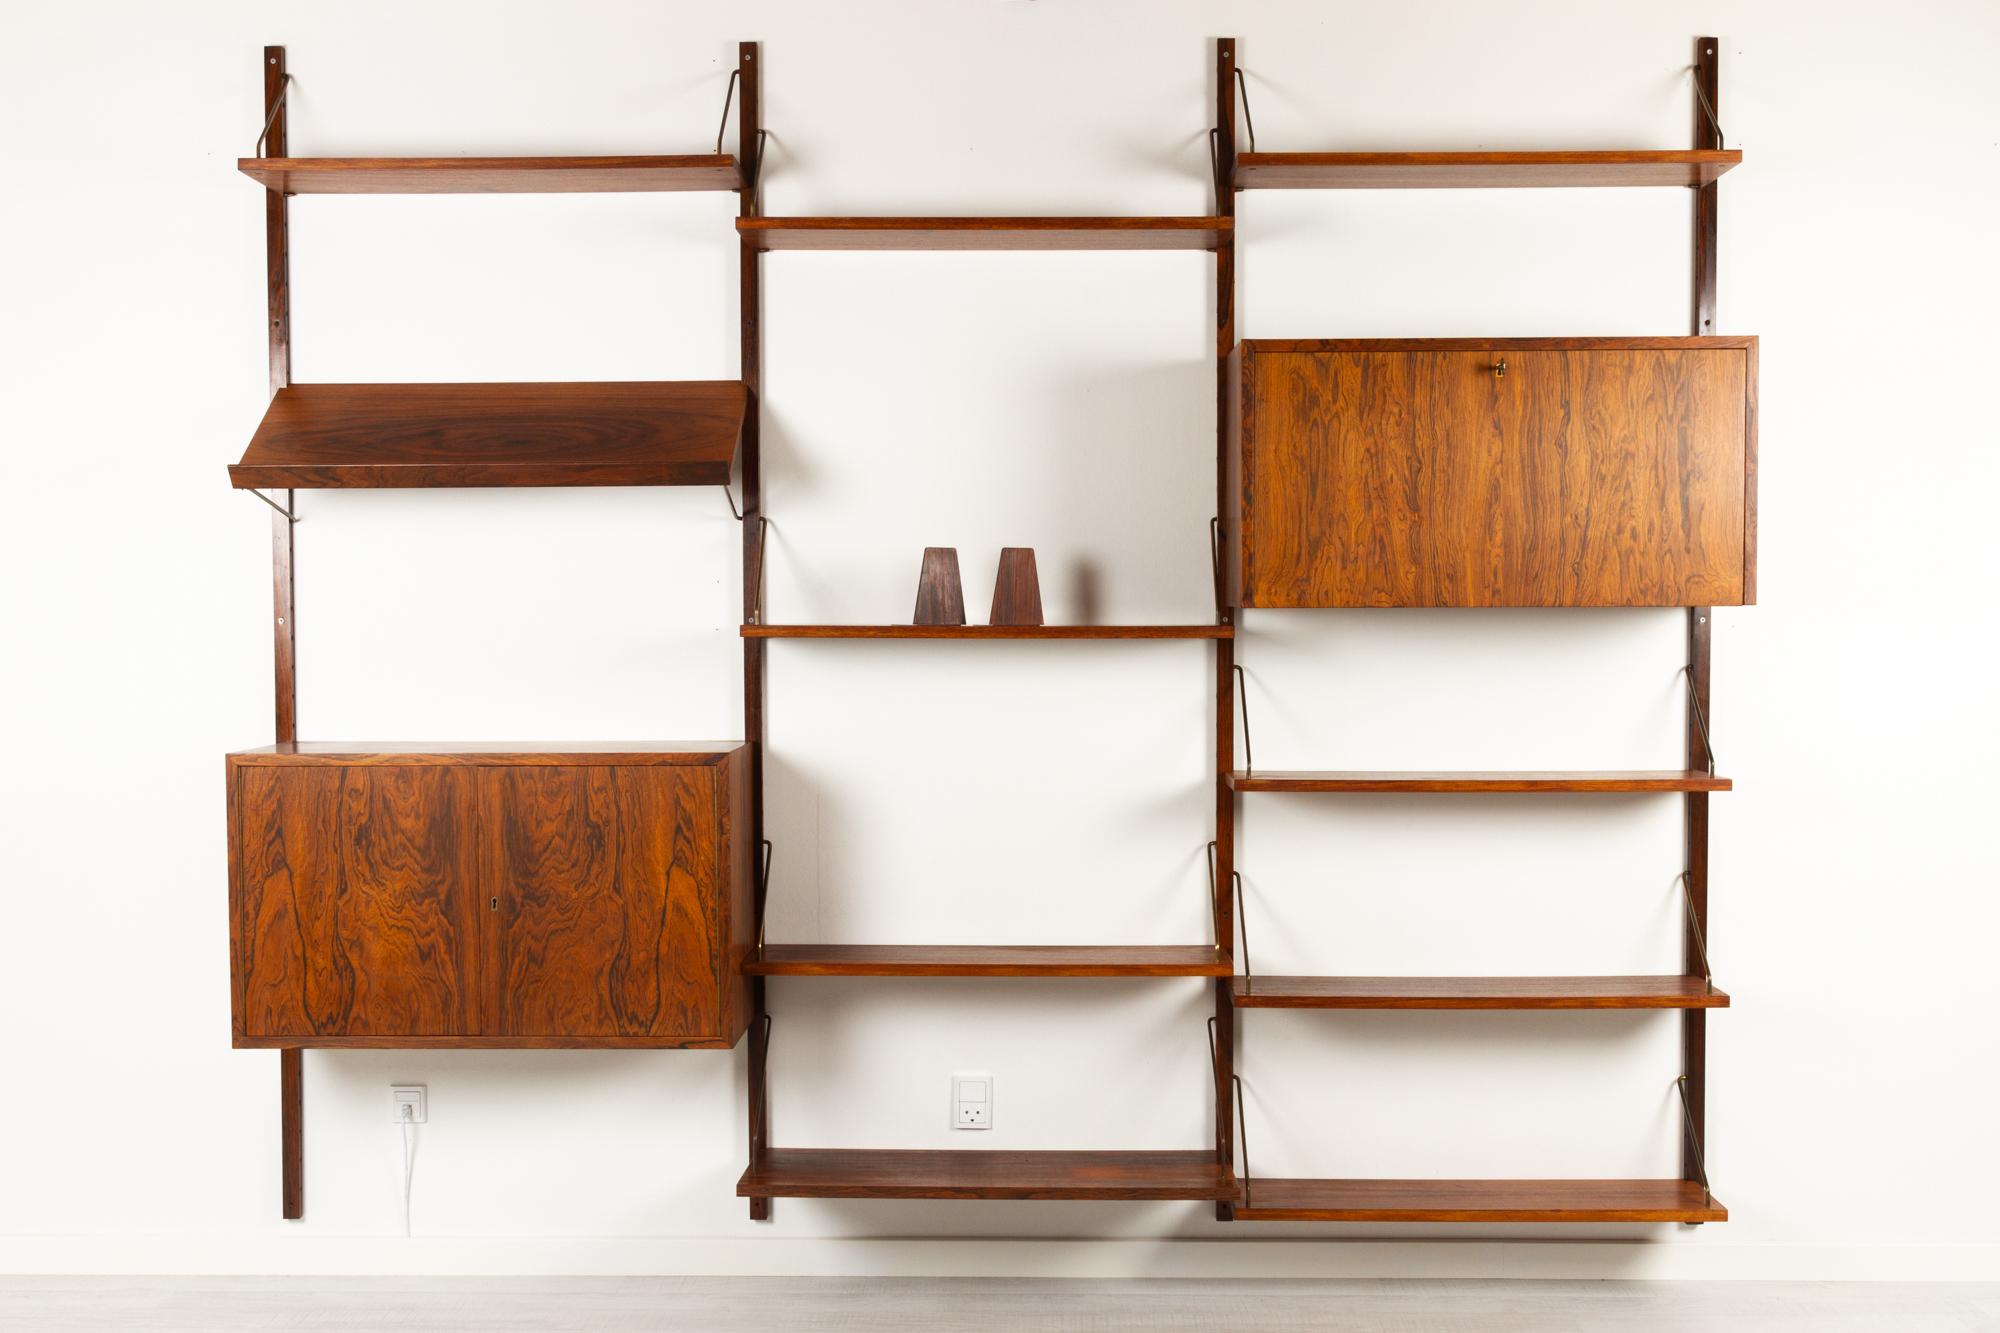 Vintage Danish rosewood wall unit, 1960s
3 bay Mid-Century Modern modular shelving system in Rosewood veneer. All shelves and cabinets can be placed and moved around as desired. Very expressive and vivid grain pattern on this wall-mounted bookcase.